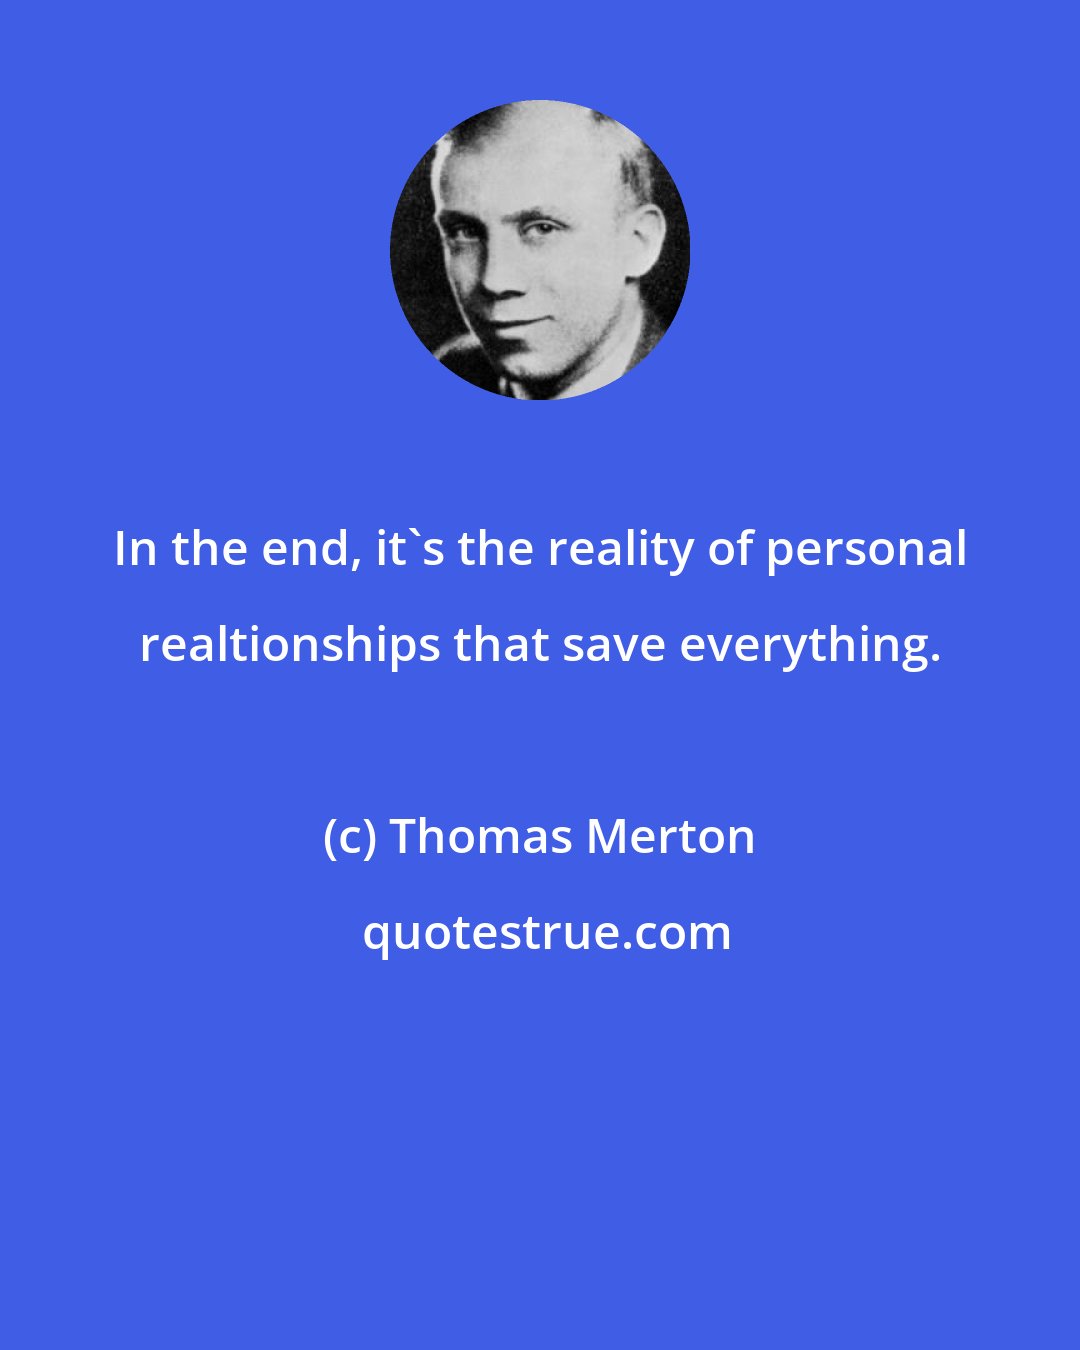 Thomas Merton: In the end, it's the reality of personal realtionships that save everything.